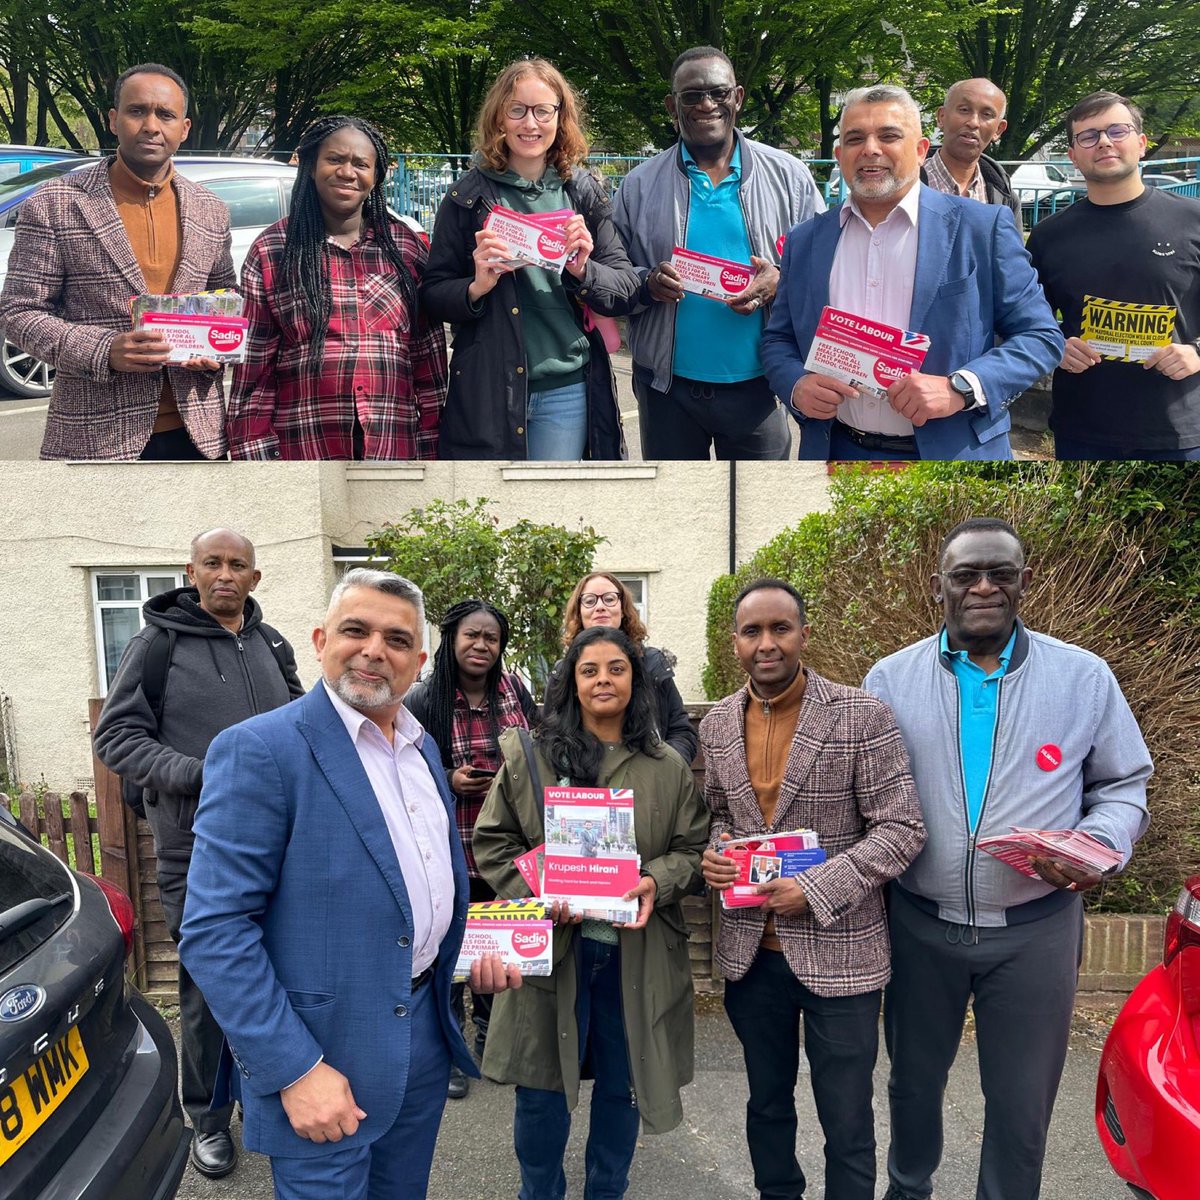 Good to be out in #Brent #Stonebridge for eve of poll #GOTV for @SadiqKhan & @KrupeshHirani #vote early and remember to take your photo ID 🌹🌹🌹